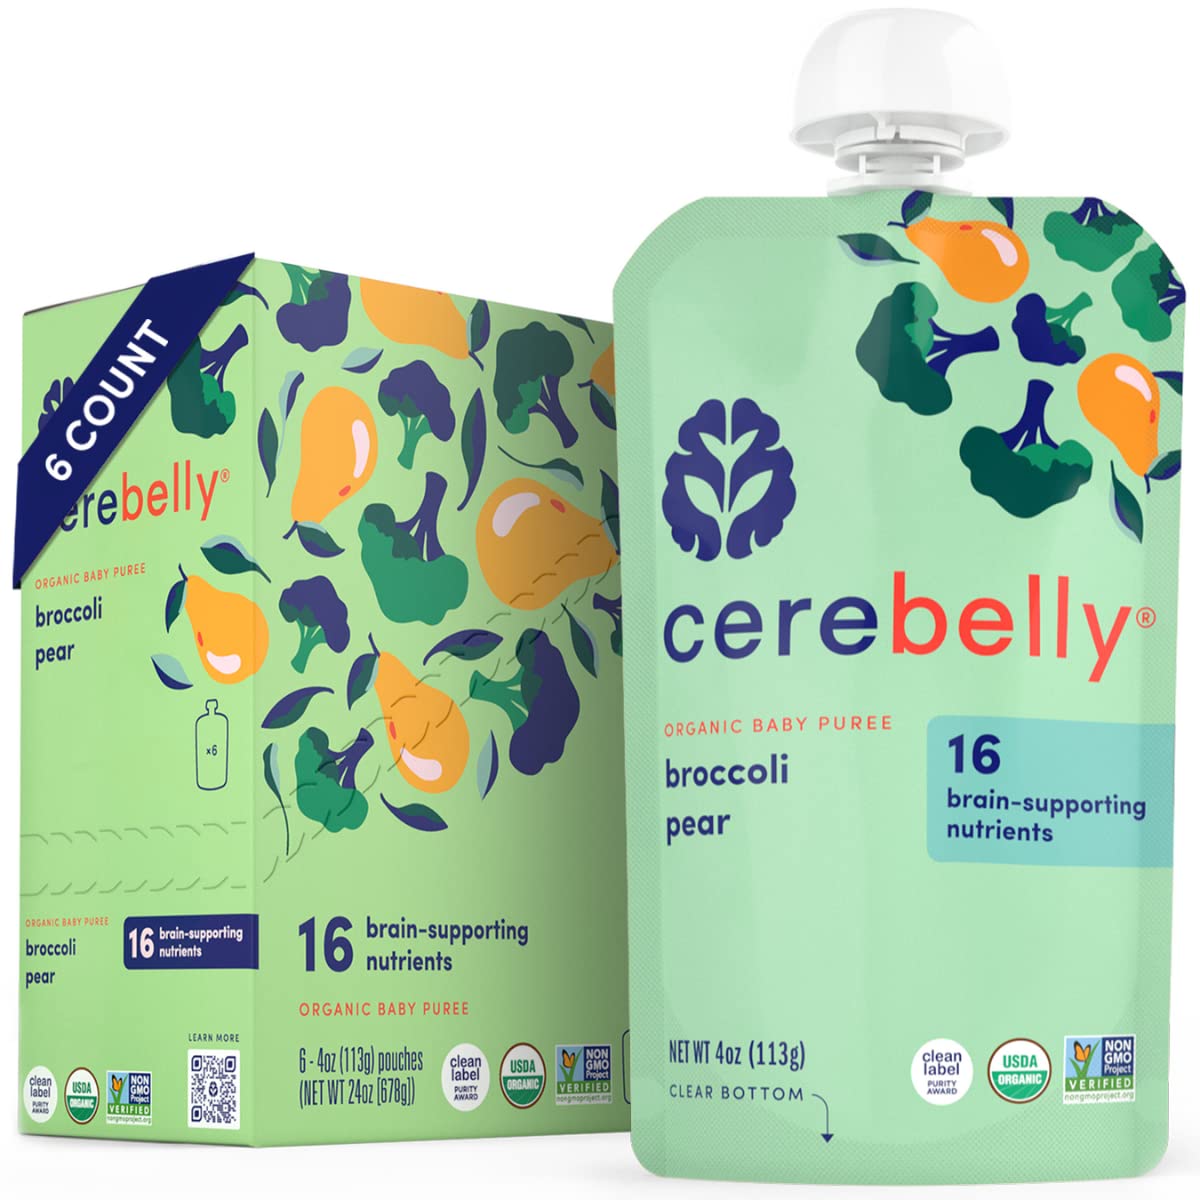 Cerebelly Baby Food Pouches – Organic Broccoli Pear (4 oz, Pack of 6) - Toddler Snacks - 16 Brain-Supporting Nutrients - Healthy Snacks, Made with Gluten-Free Ingredients, Non-GMO, No Added Sugar